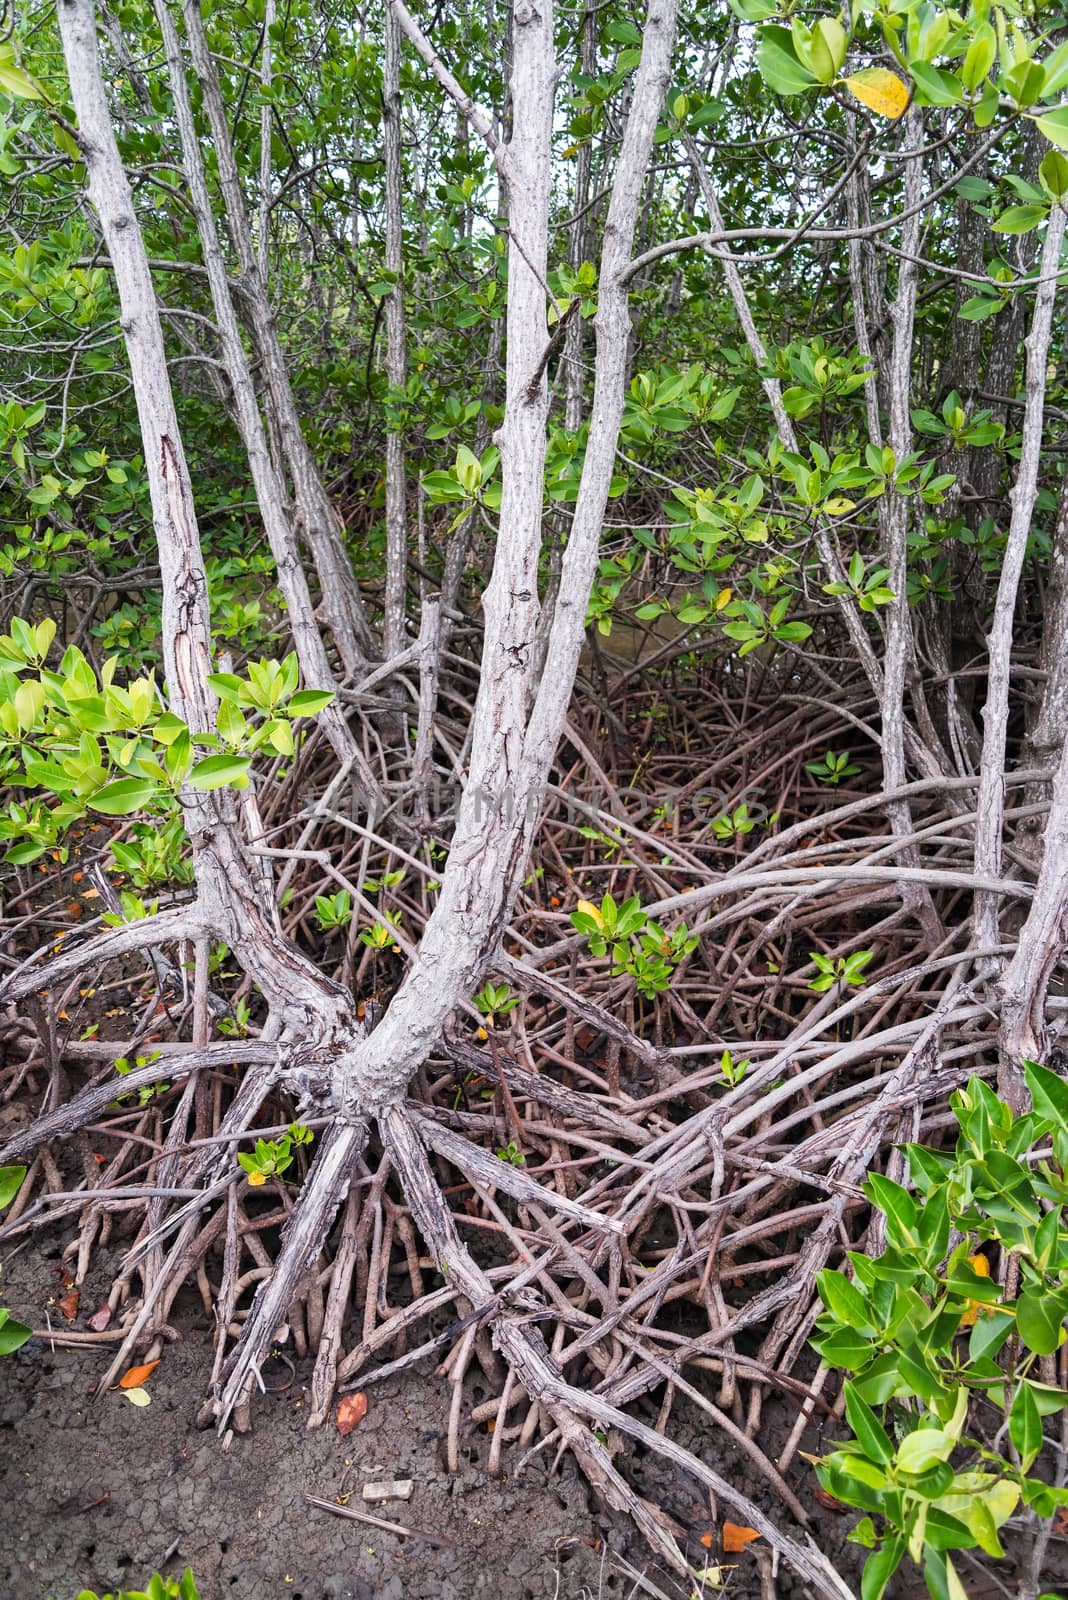 Mangrove forest on the coast of Thailand